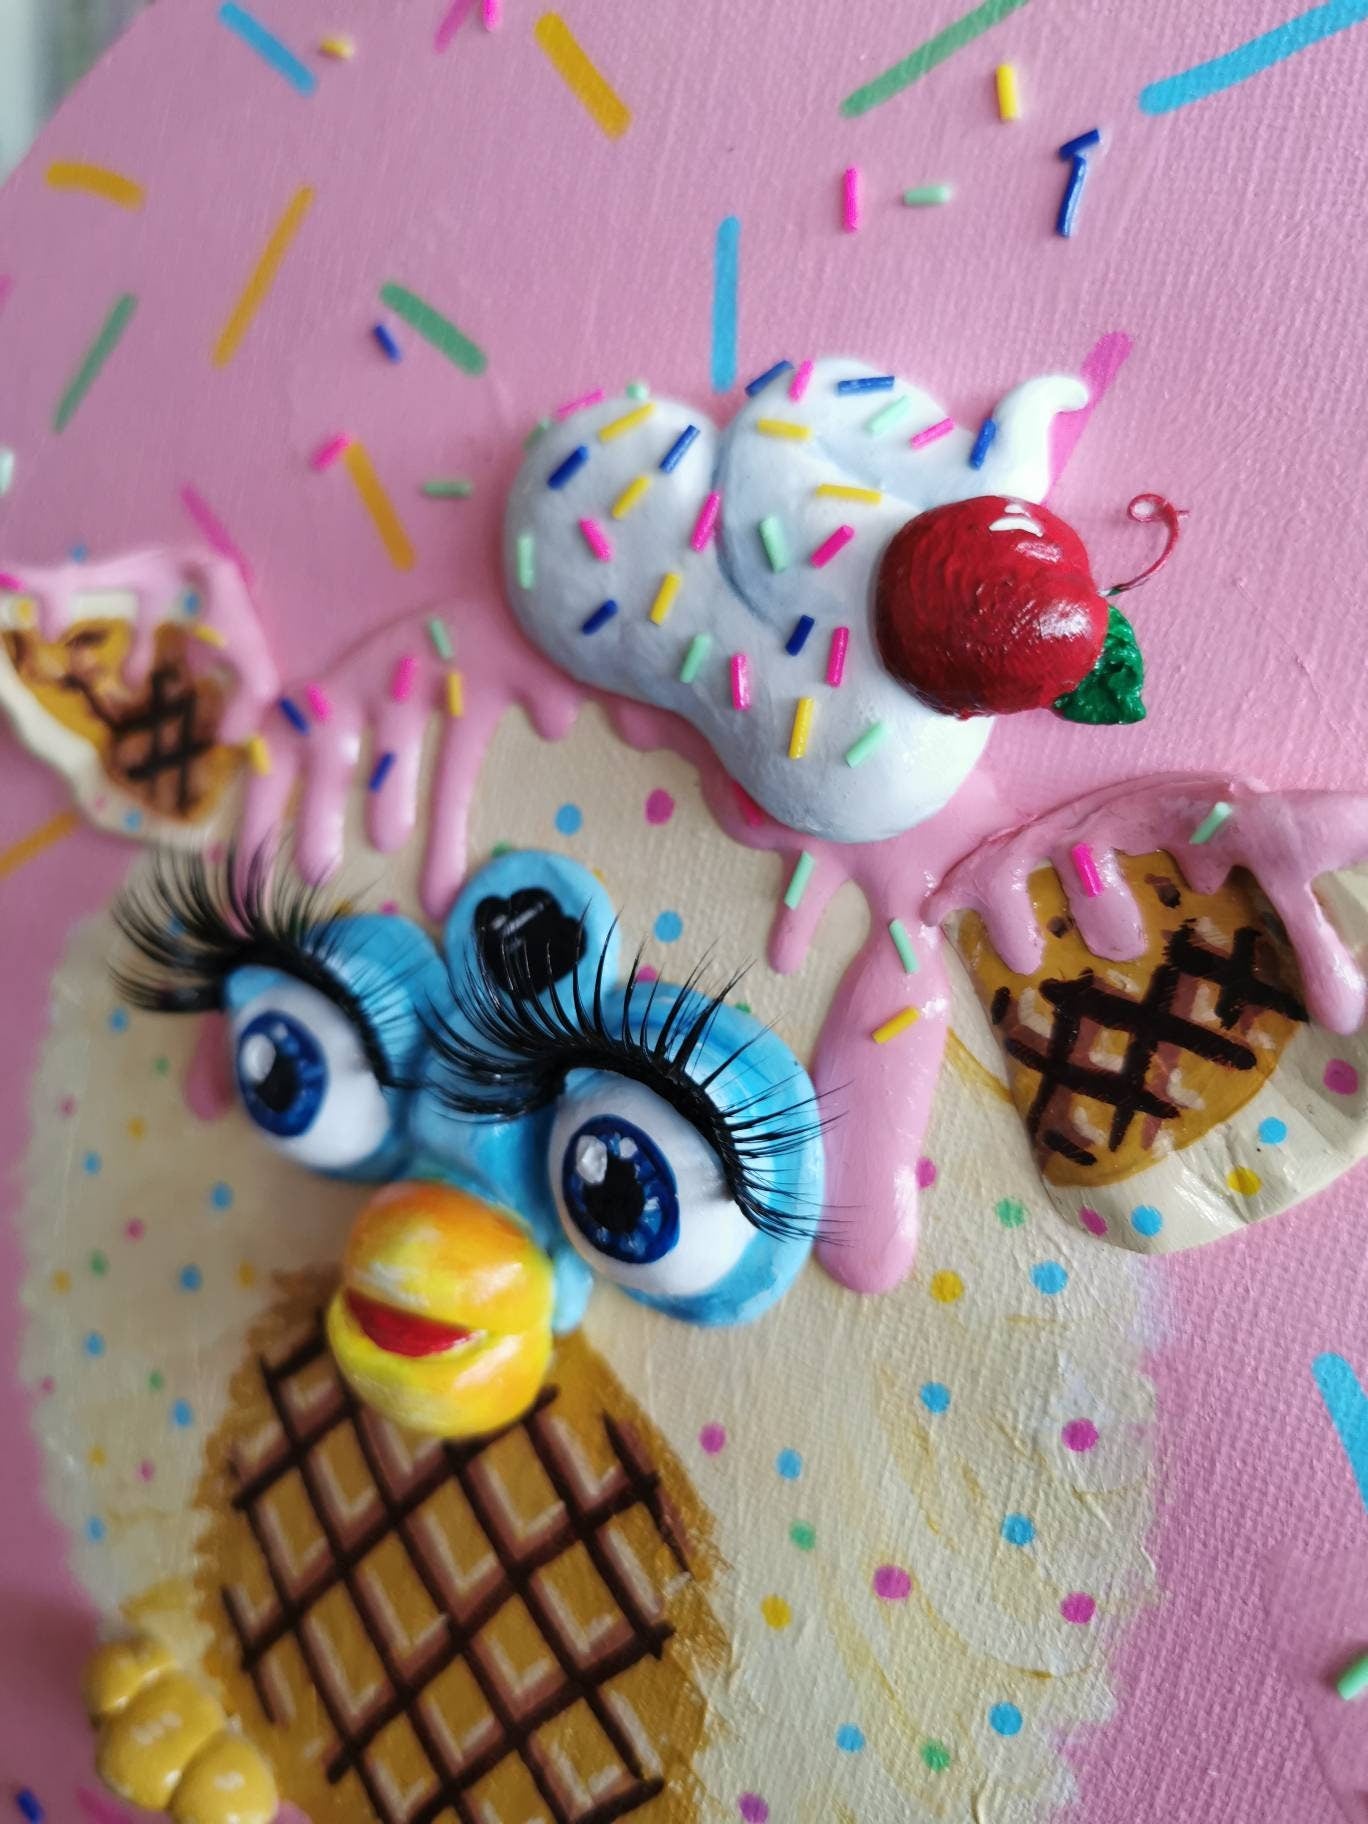 Furby Sprinkles and Ice Cream Painting. Original, one of a kind 3D painting.